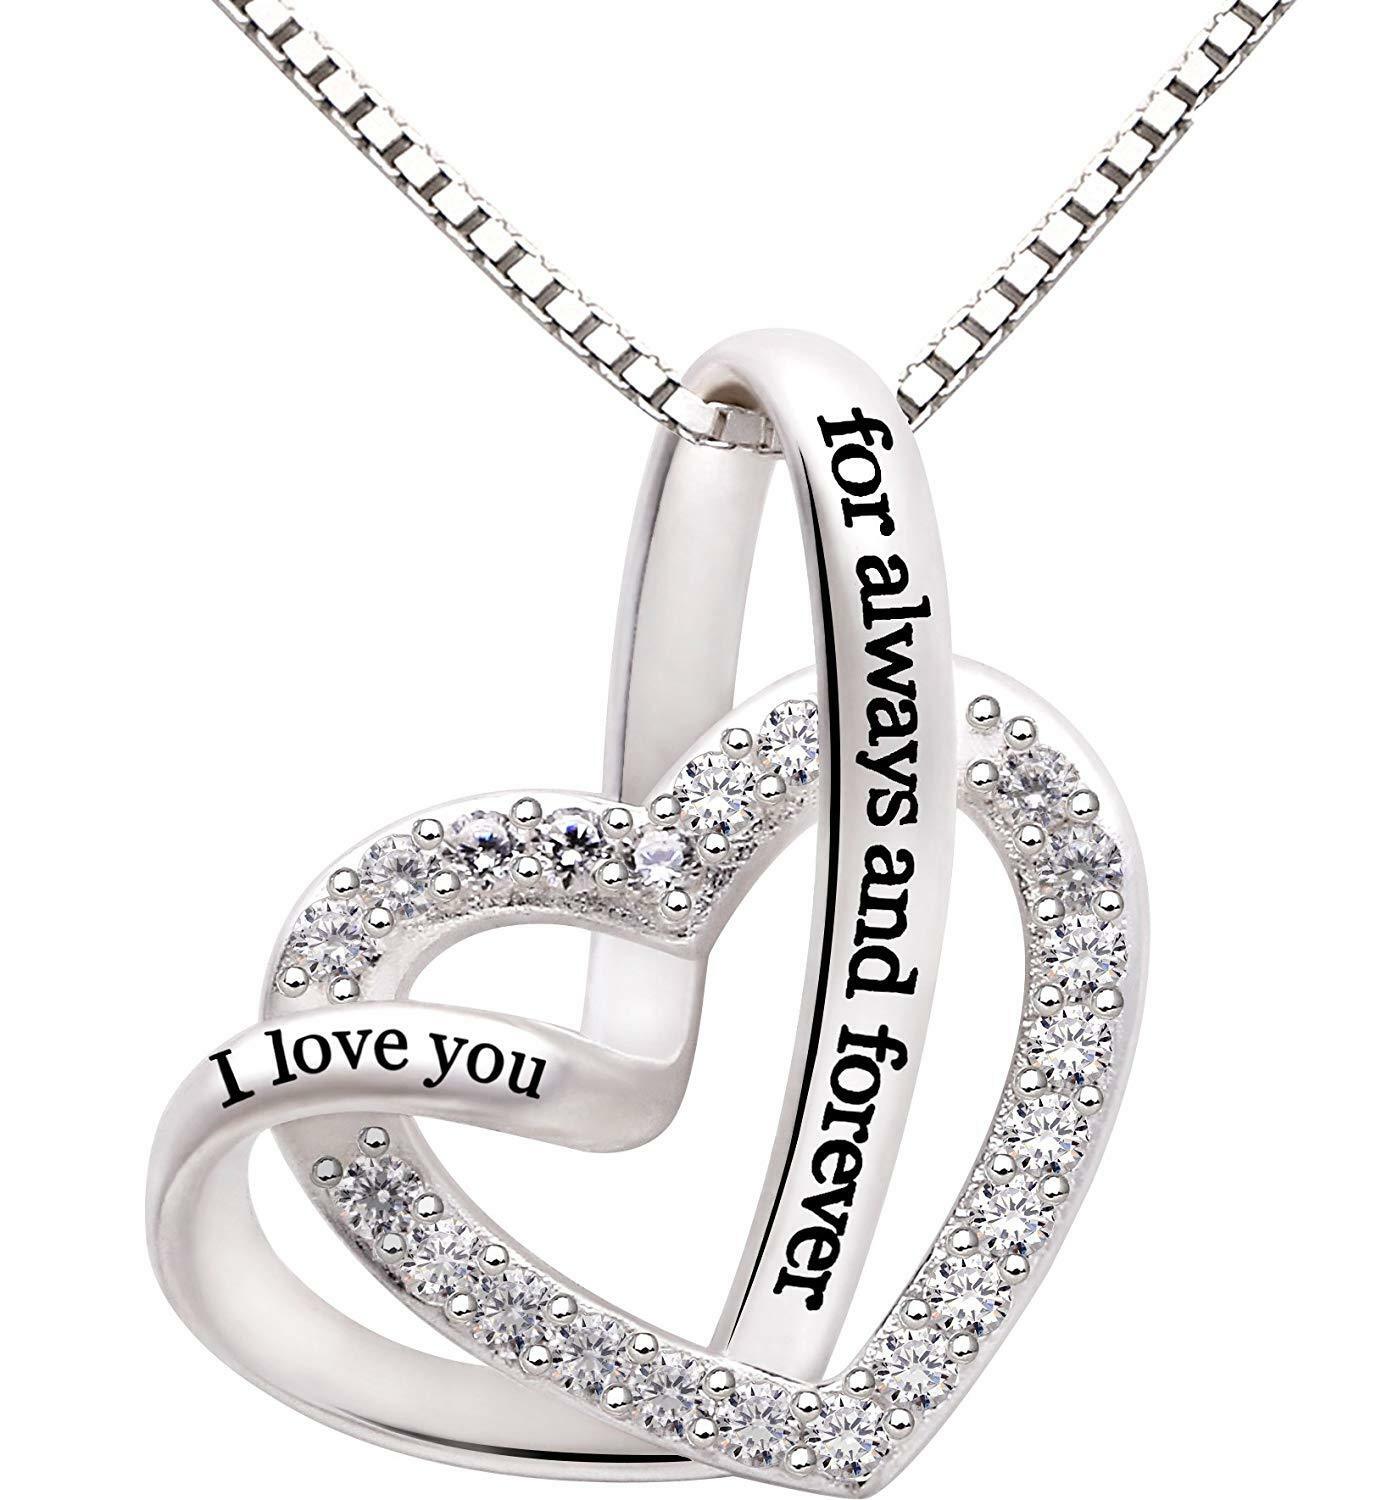 I Love You Forever And Always Heart Necklace embellished With Crystals In 18k White Gold Filled